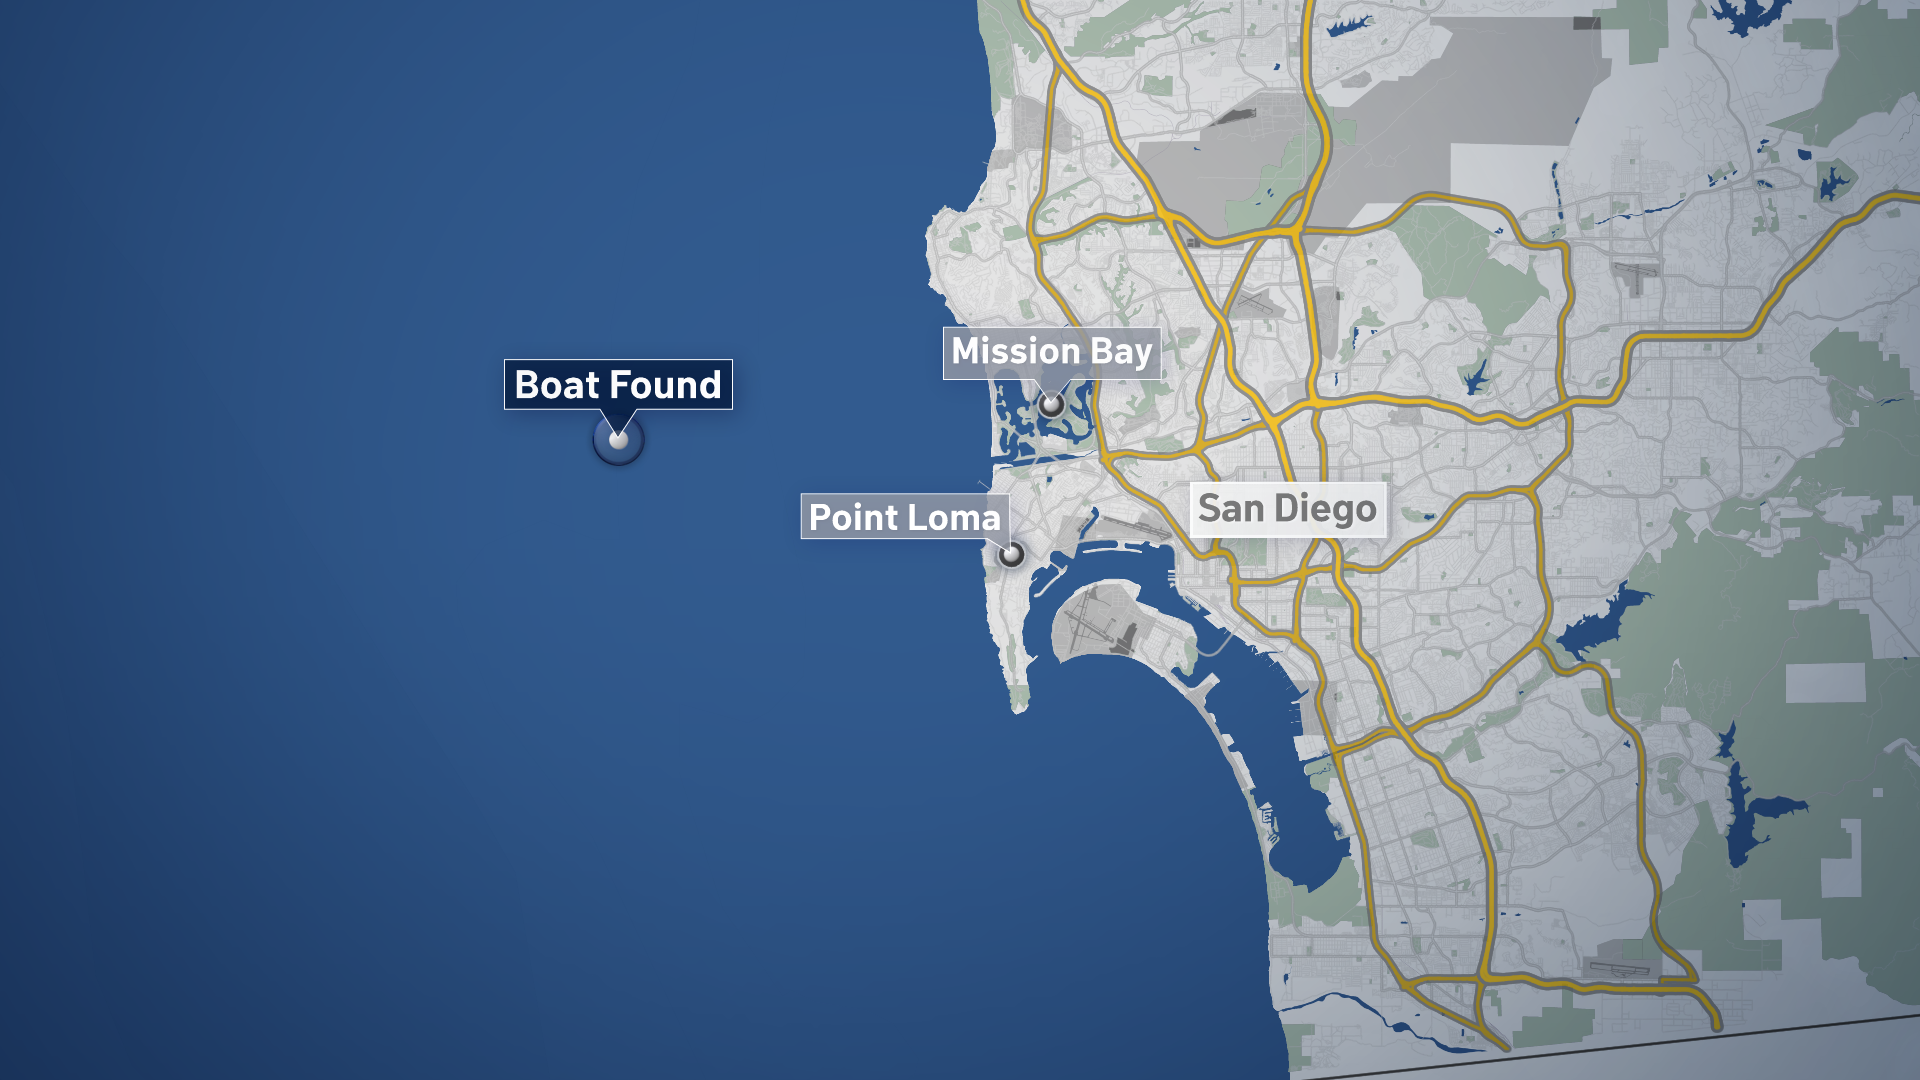 A map showing the estimated location of where "Defiance" was located in relation to Mission Bay and Point Loma in San Diego, CA